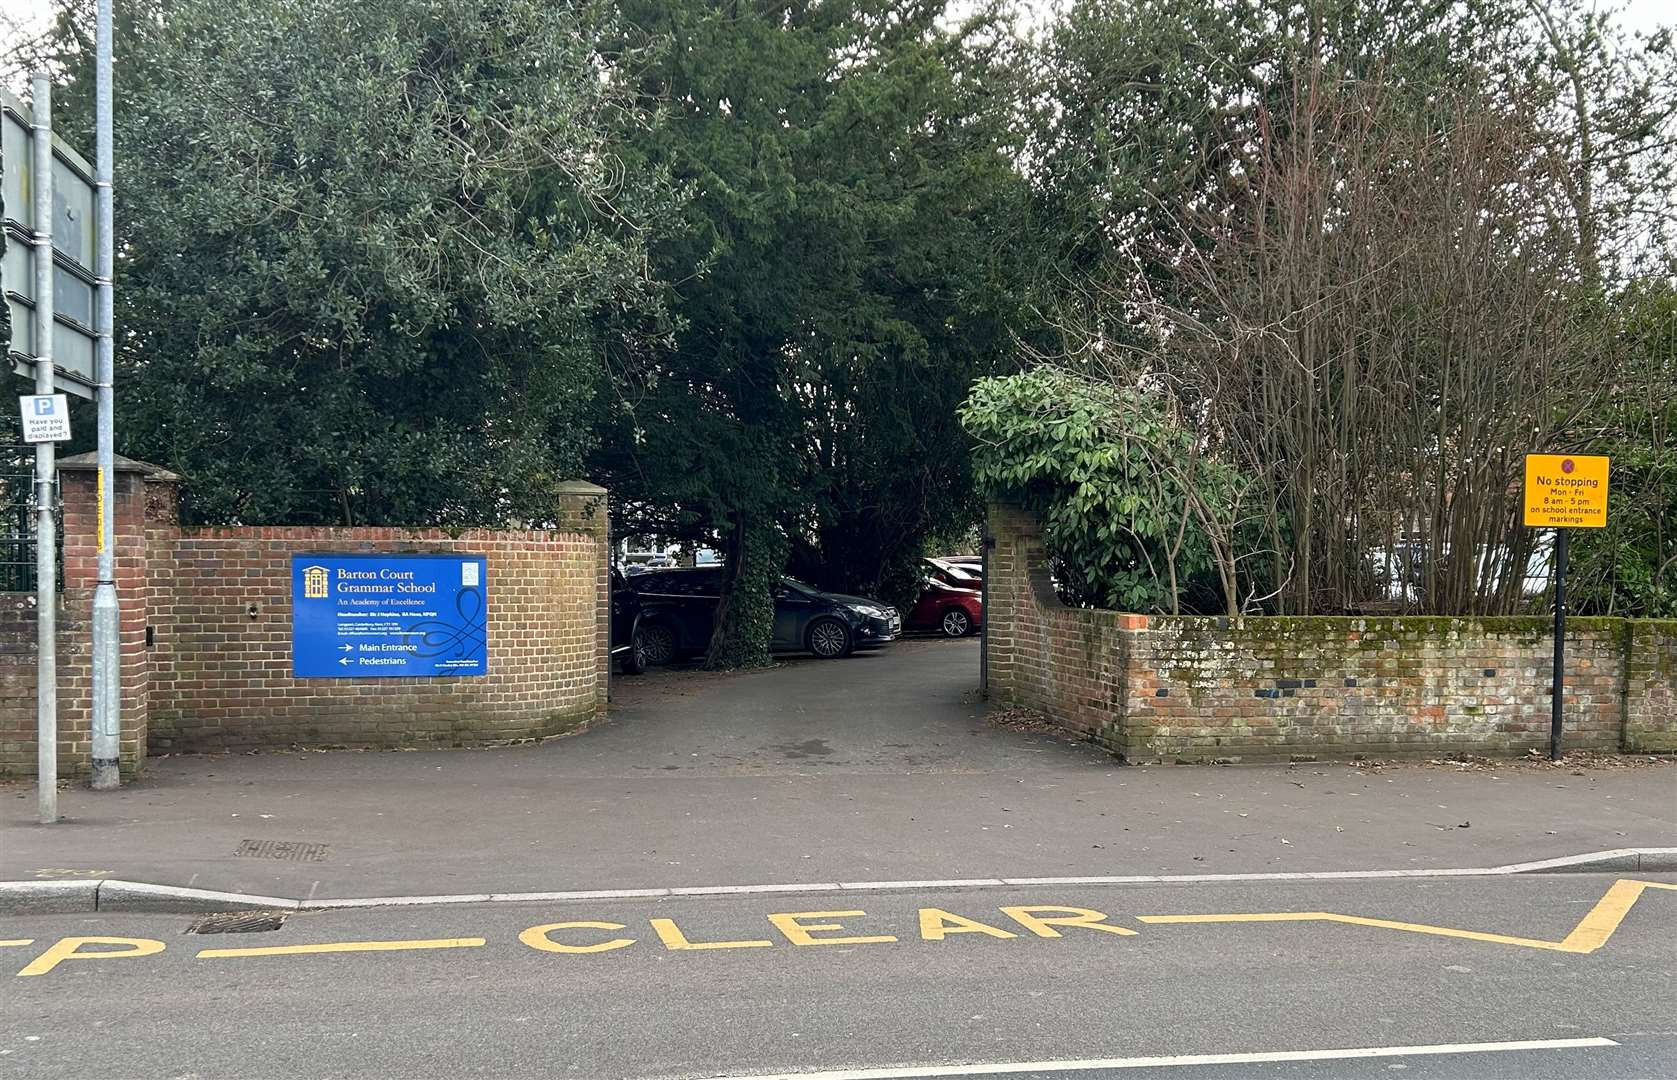 A letter sent by Barton Court Grammar School in Canterbury to parents has warned them of recent attacks and attempted robberies